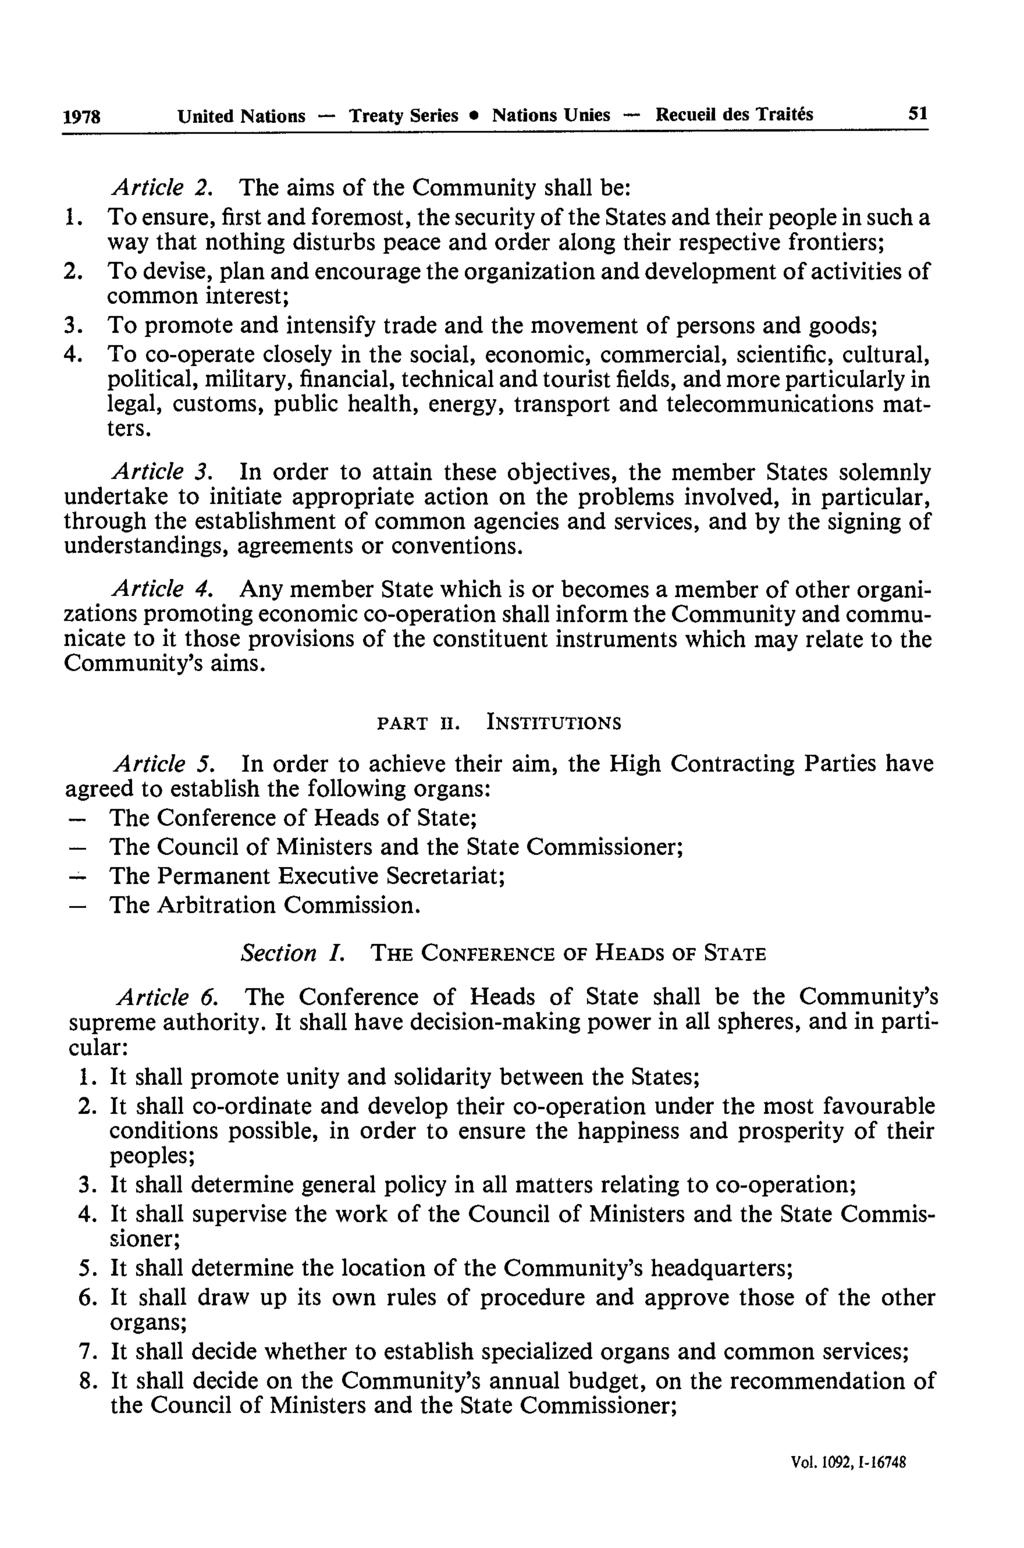 1978 United Nations Treaty Series Nations Unies Recueil des Traités 5 Article 2. The aims of the Community shall be: 1.